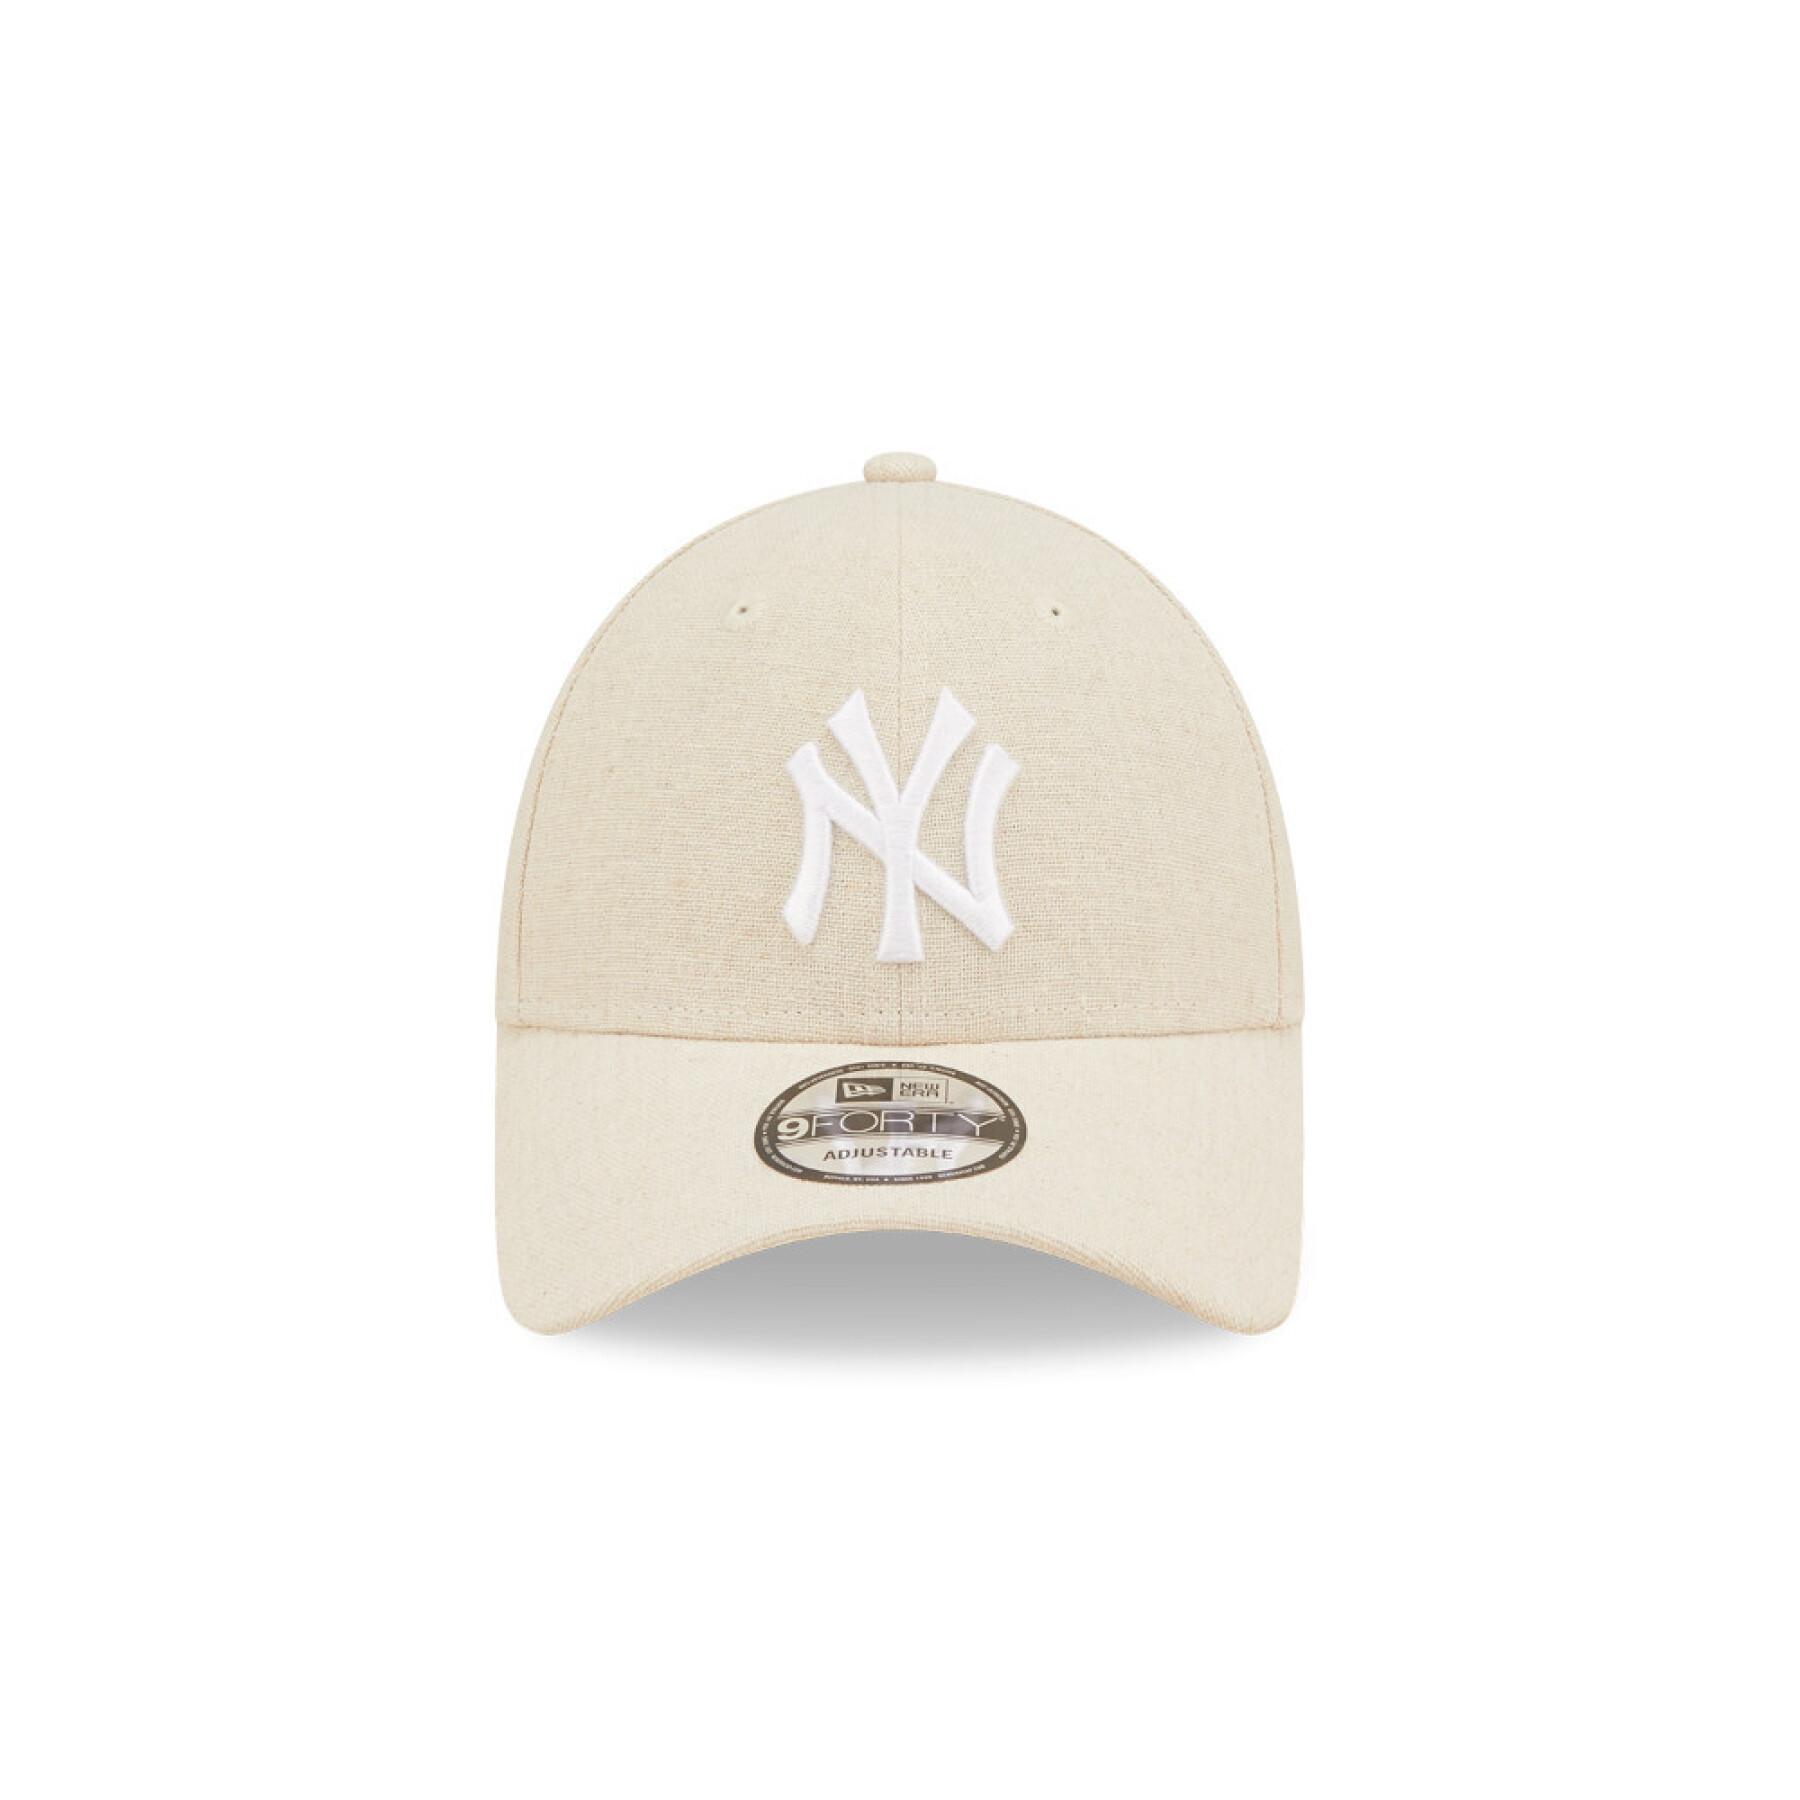 Casquette 9forty New York Yankees Linen